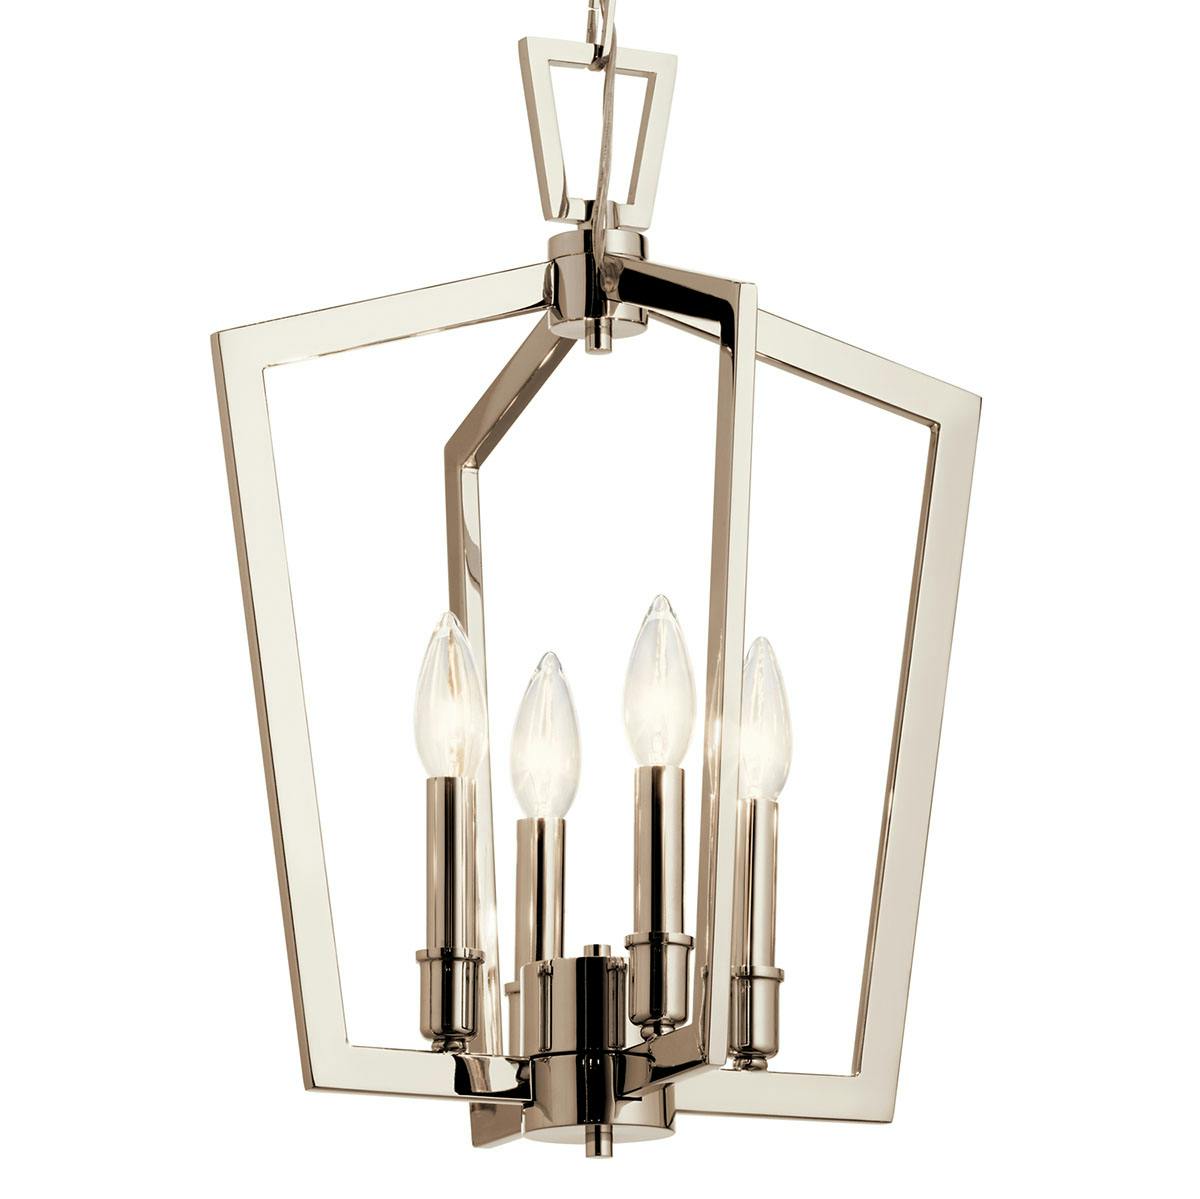 Close up view of the Abbotswell 19" 4 Light Pendant Nickel on a white background